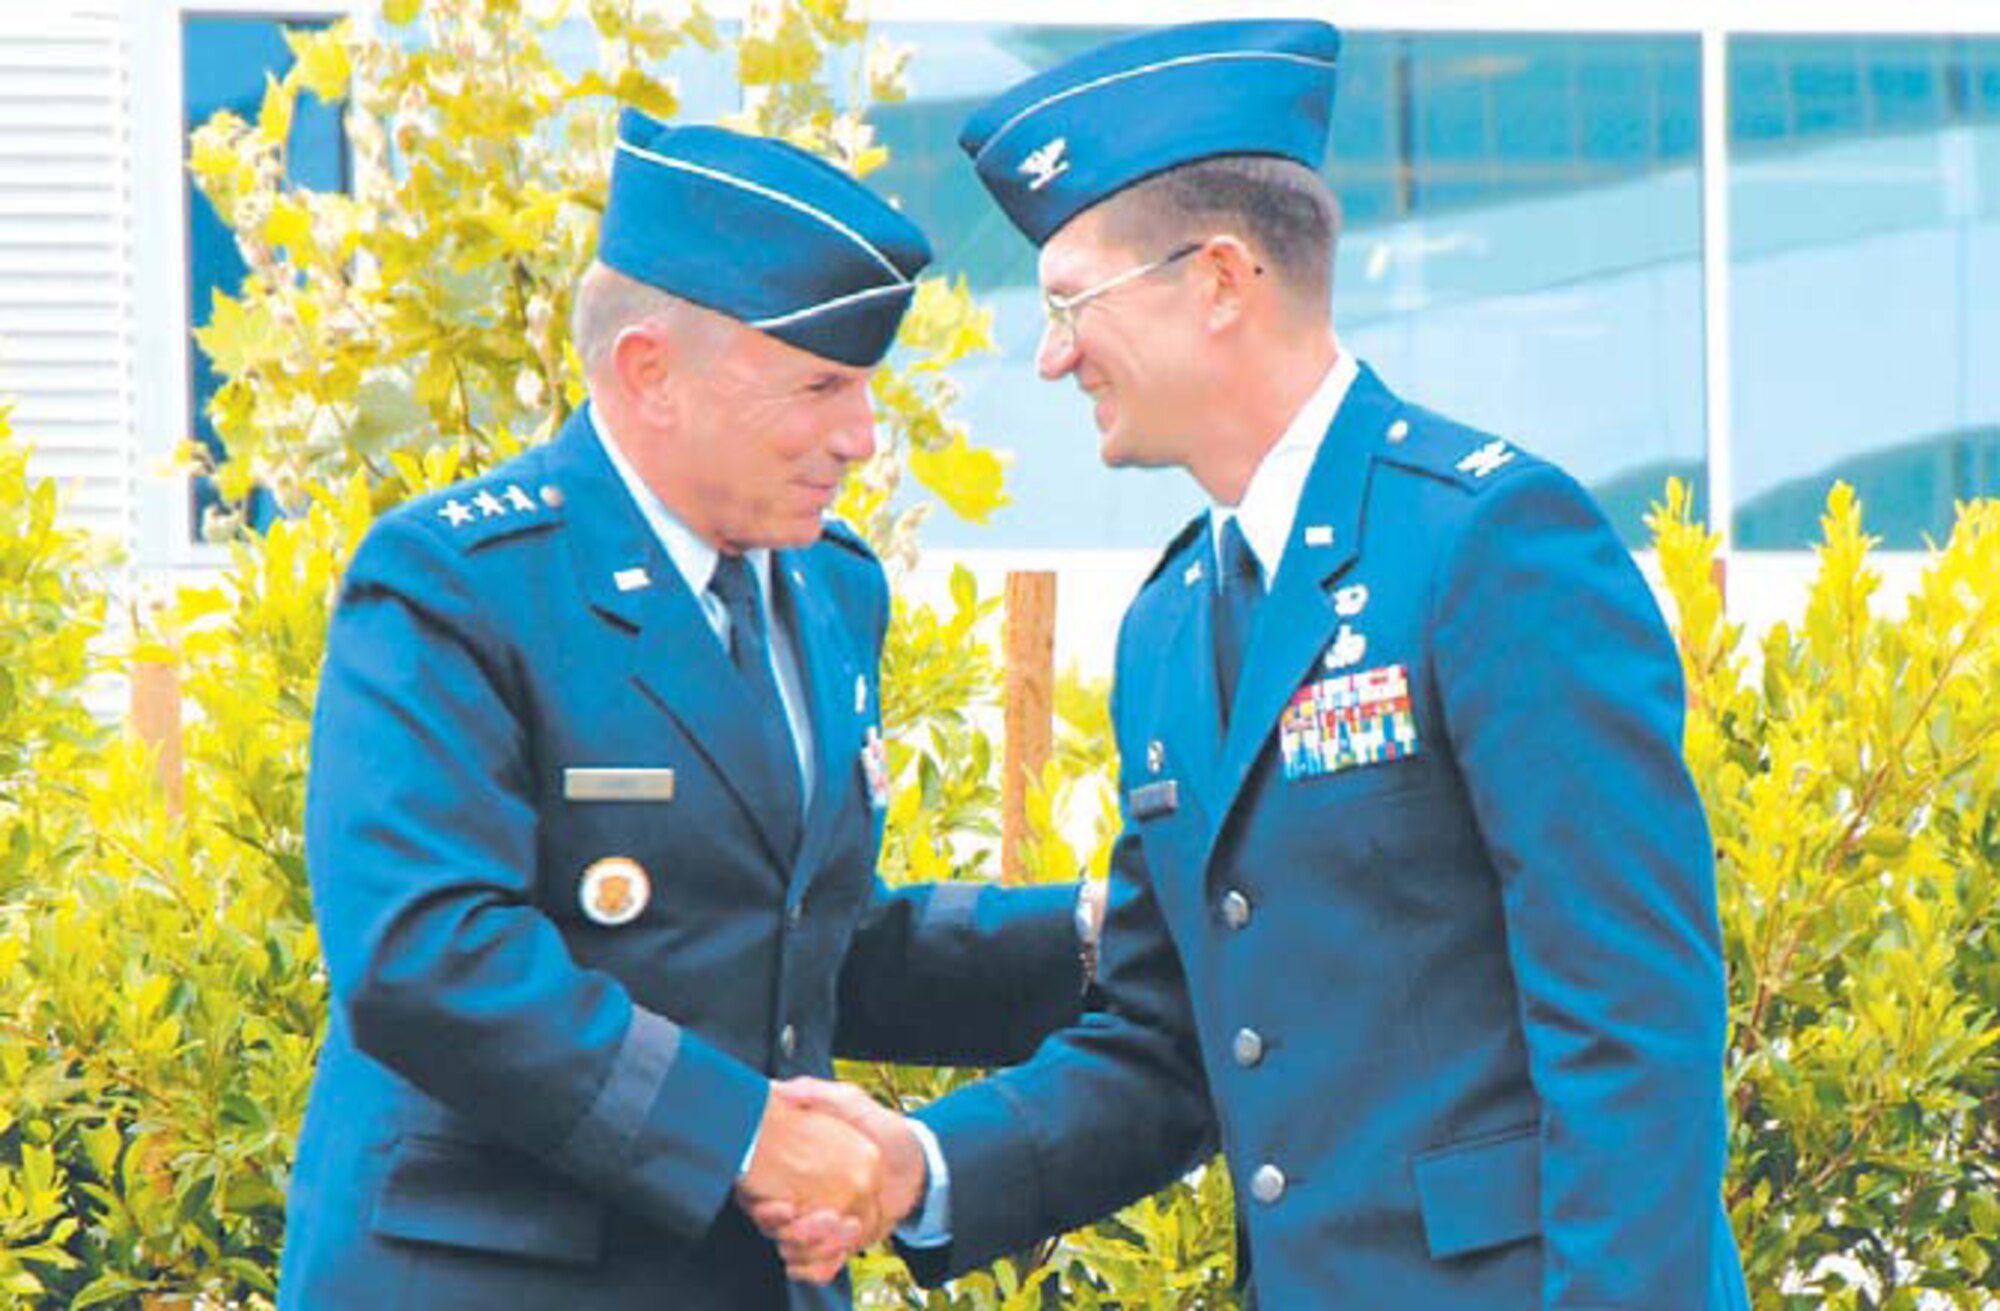 Lt. Gen. Michael Hamel (left), Space and Missile Systems Center commander, welcomes aboard the 61st Air Base Wing commander, Col. Joseph Schwarz. The Wing stand-up took place at the Los Angeles Air Force Base?s Schriever Space Complex courtyard, July 31.